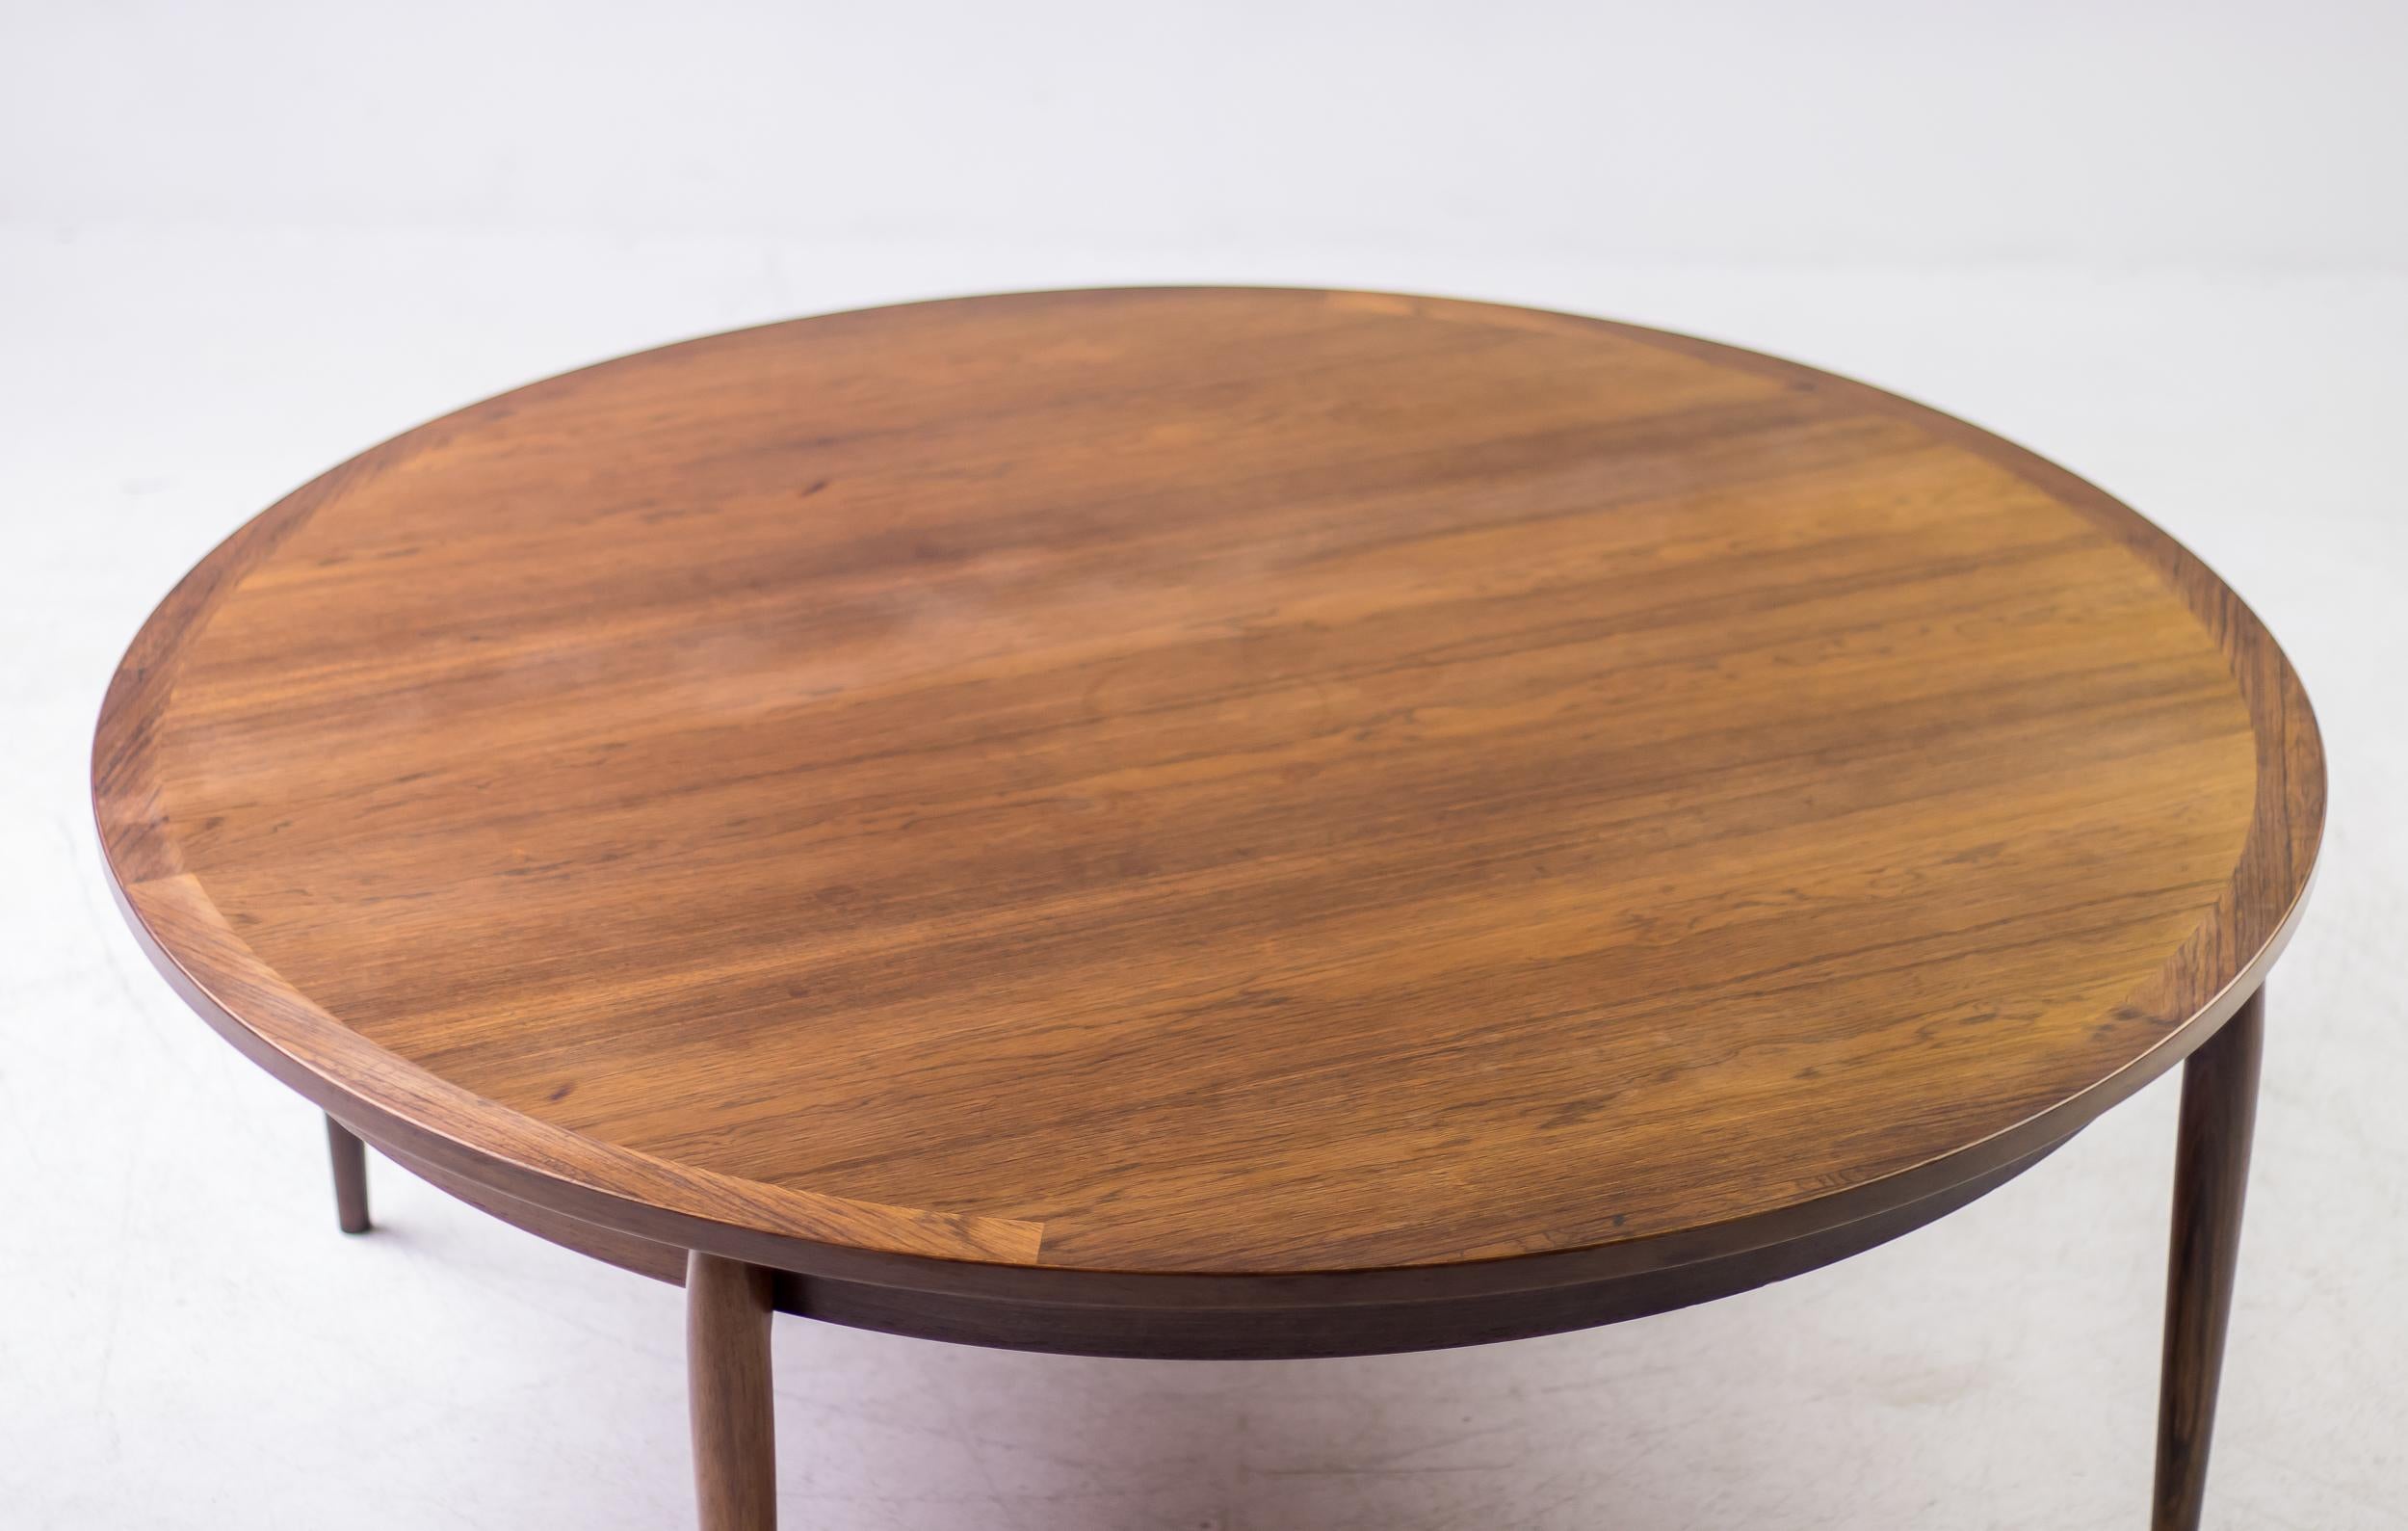 Elegant and refined large round coffee table in exquisite Brazilian rosewood made by Heltborg Møbler.
Remarkable craftsmanship and beautiful details.
Marked with silver foil label.